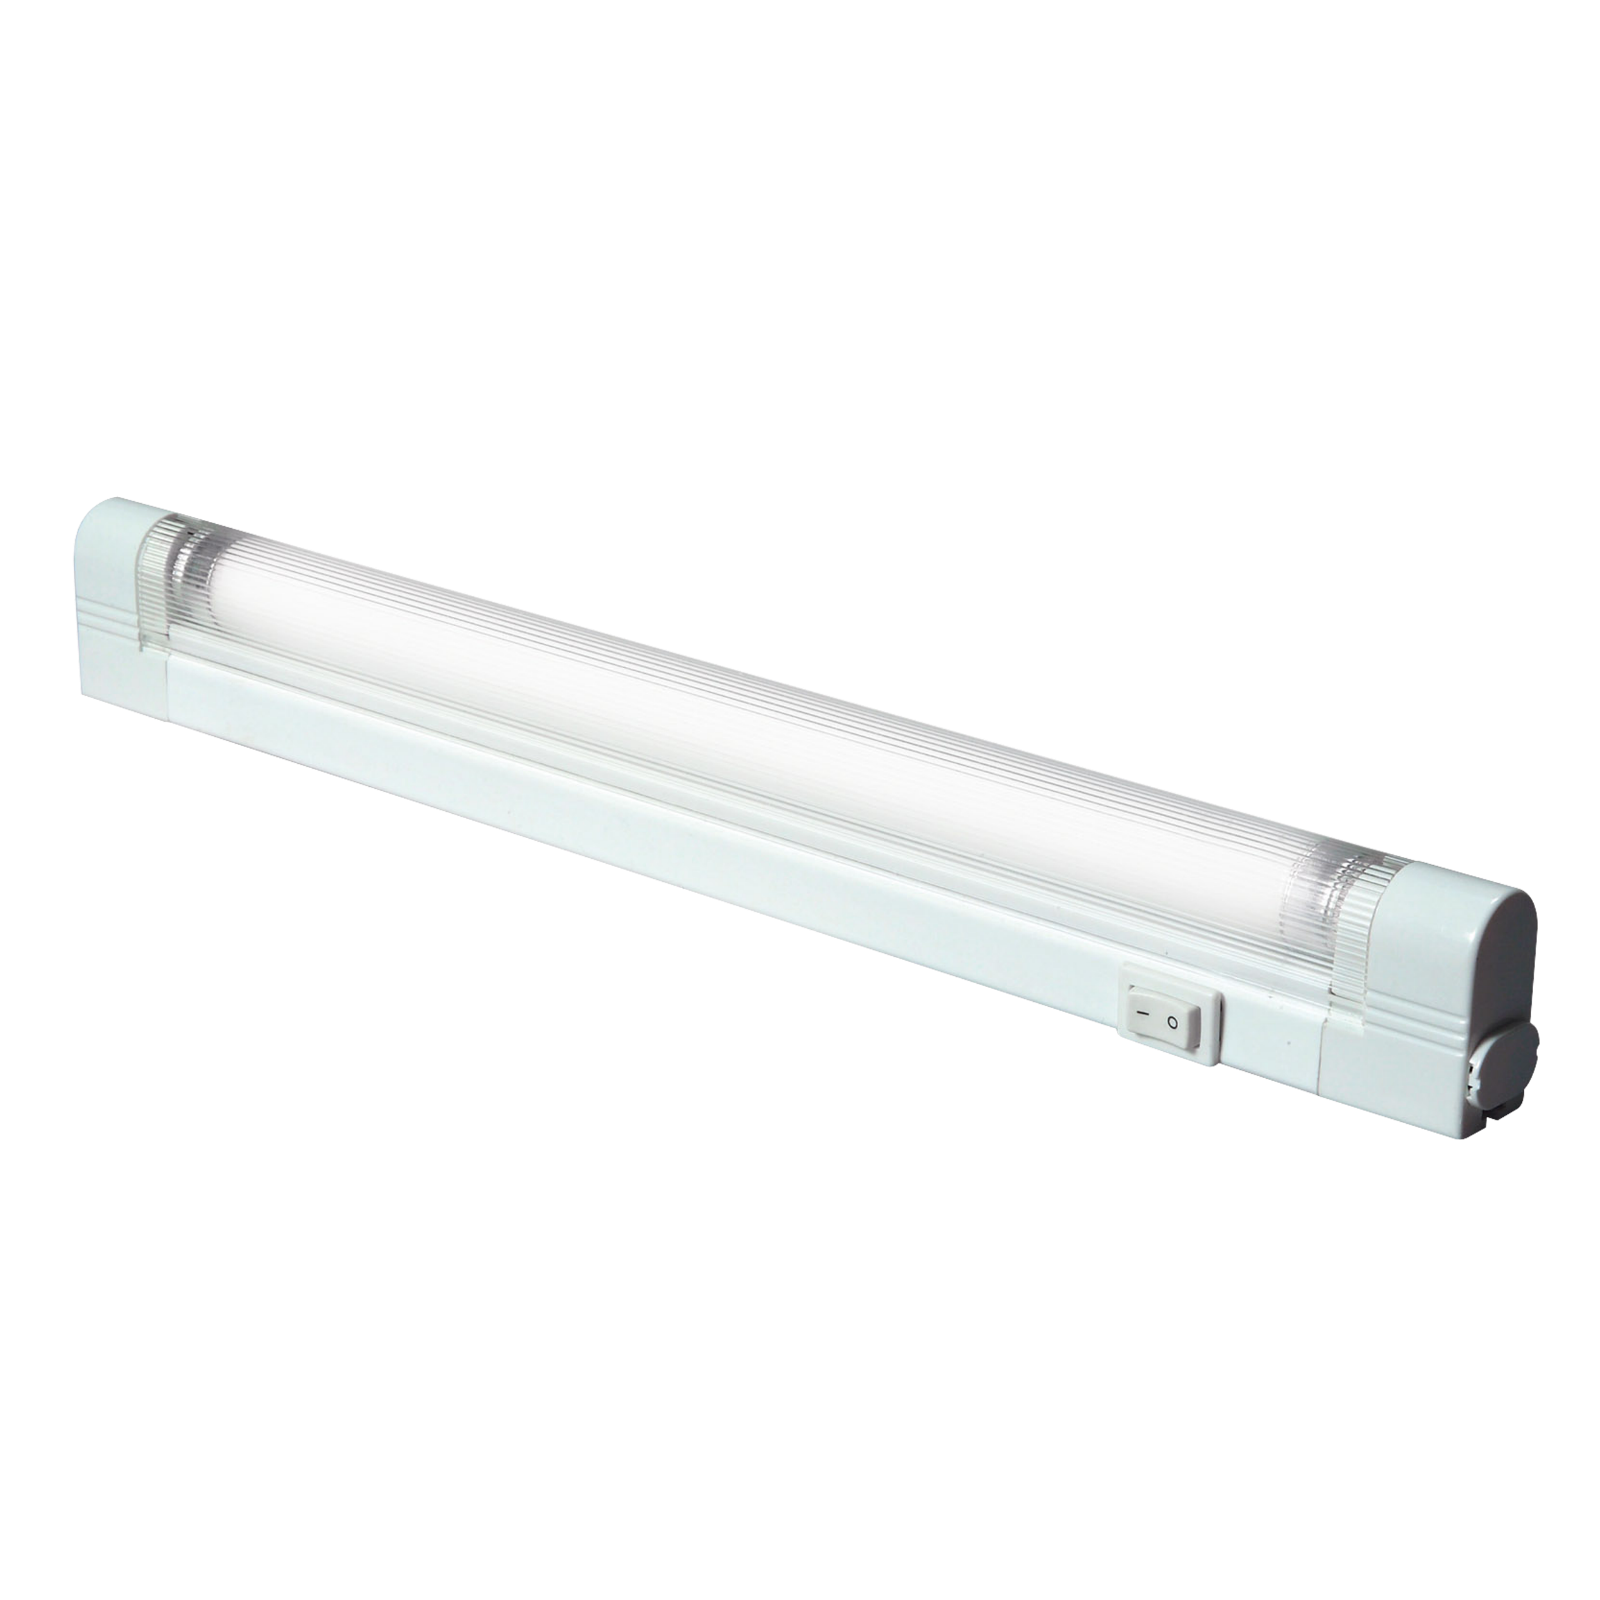 IP20 T5/G5 35W Slimline Linkable Fluorescent Fitting With Tube, Switch And Diffuser 3500K - T535 